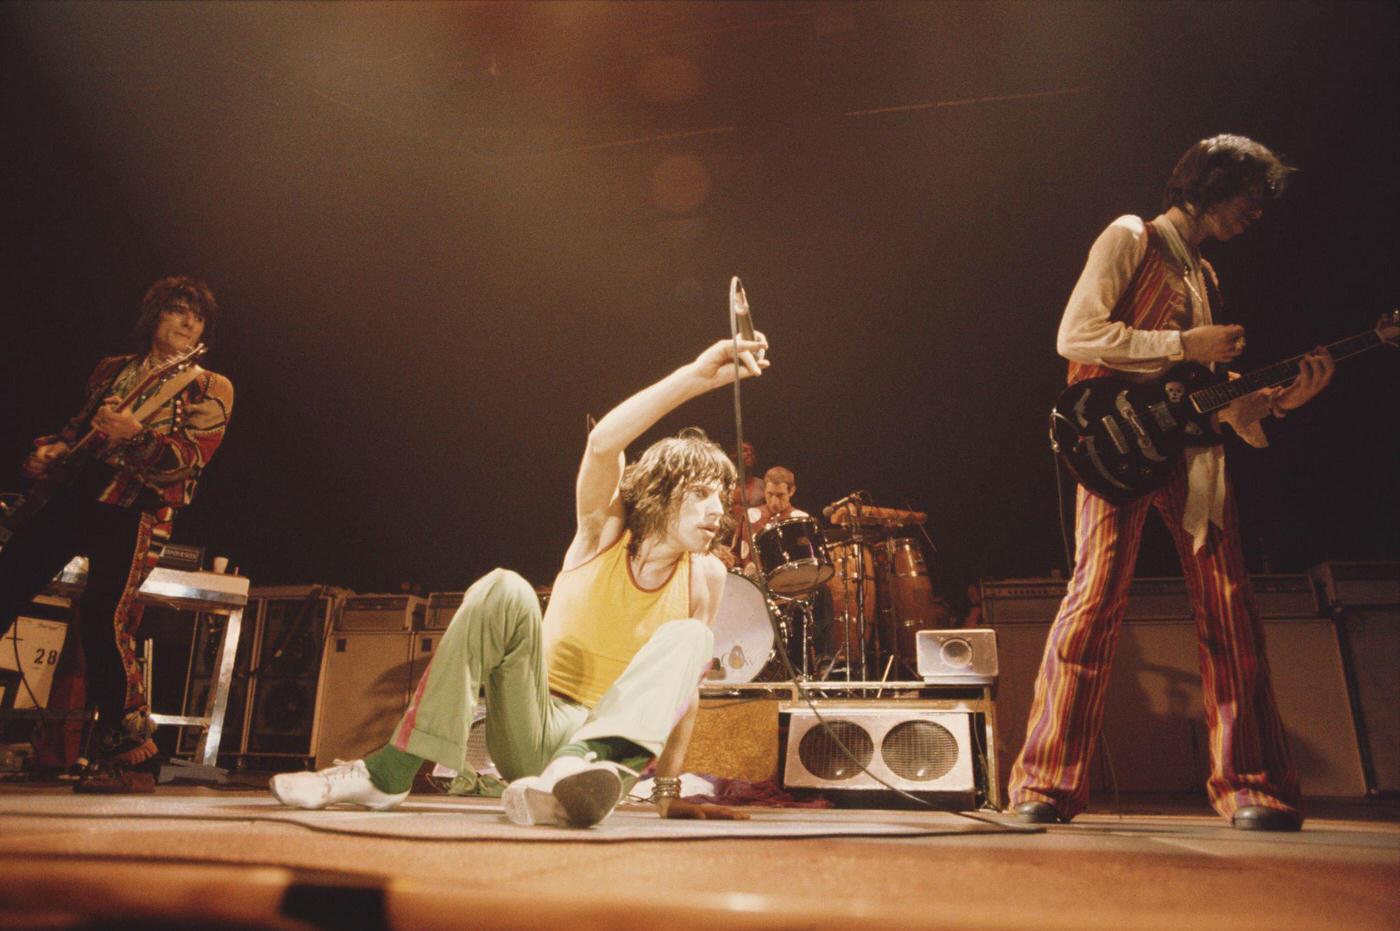 Ronnie Wood, Mick Jagger, Charlie Watts, and Keith Richards perform on stage during the tour, June 1975.